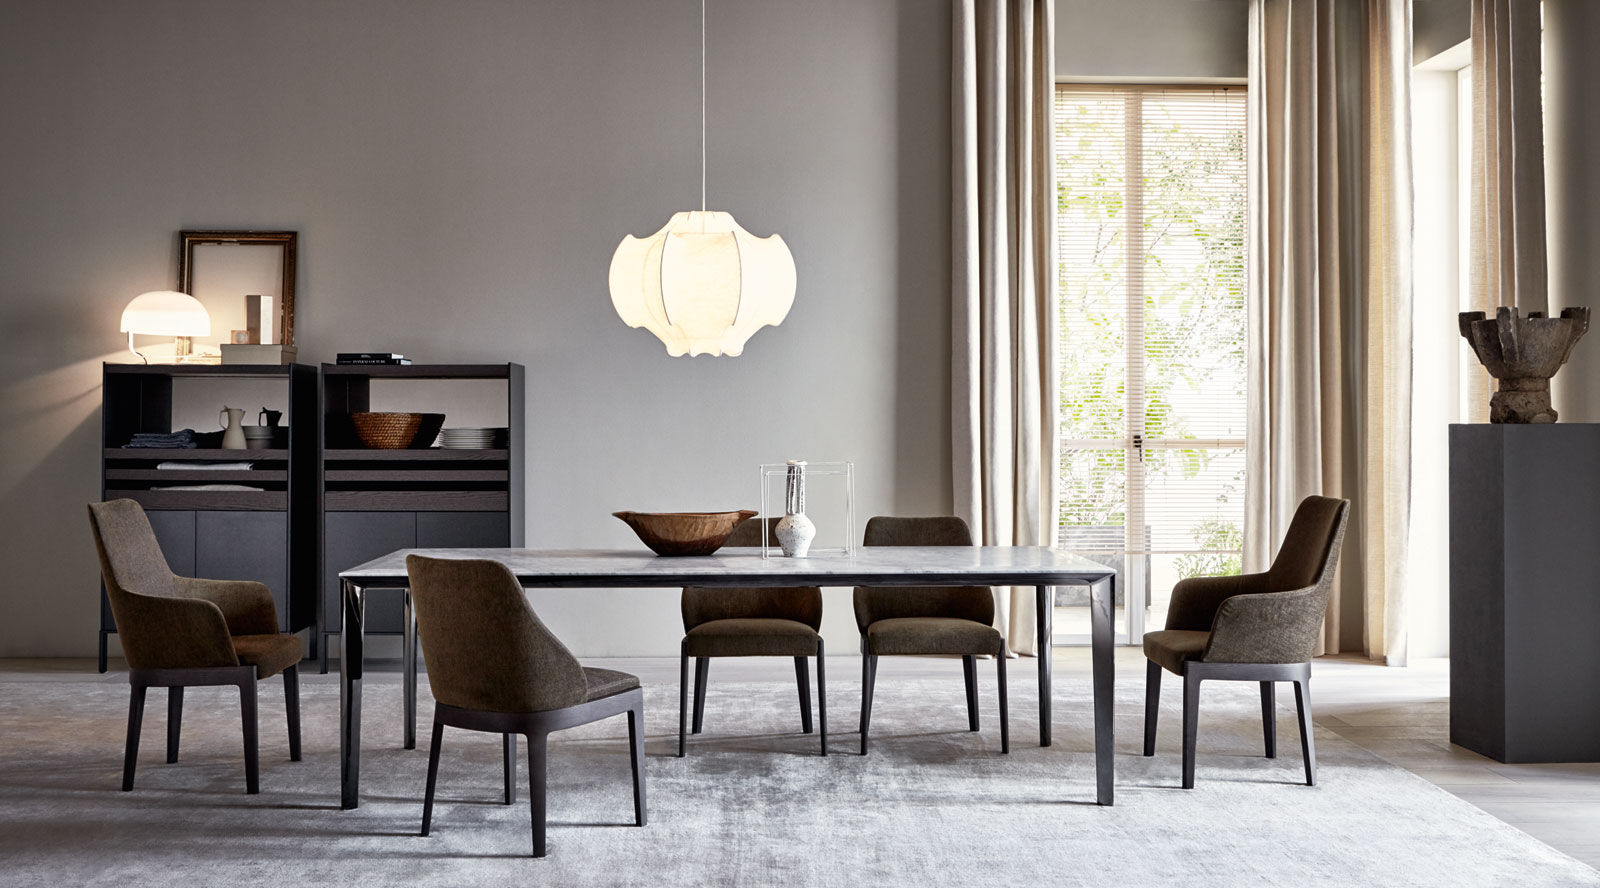 Chelsea chair is a designer chair that is produced by Molteni&C and offered by Peverelli